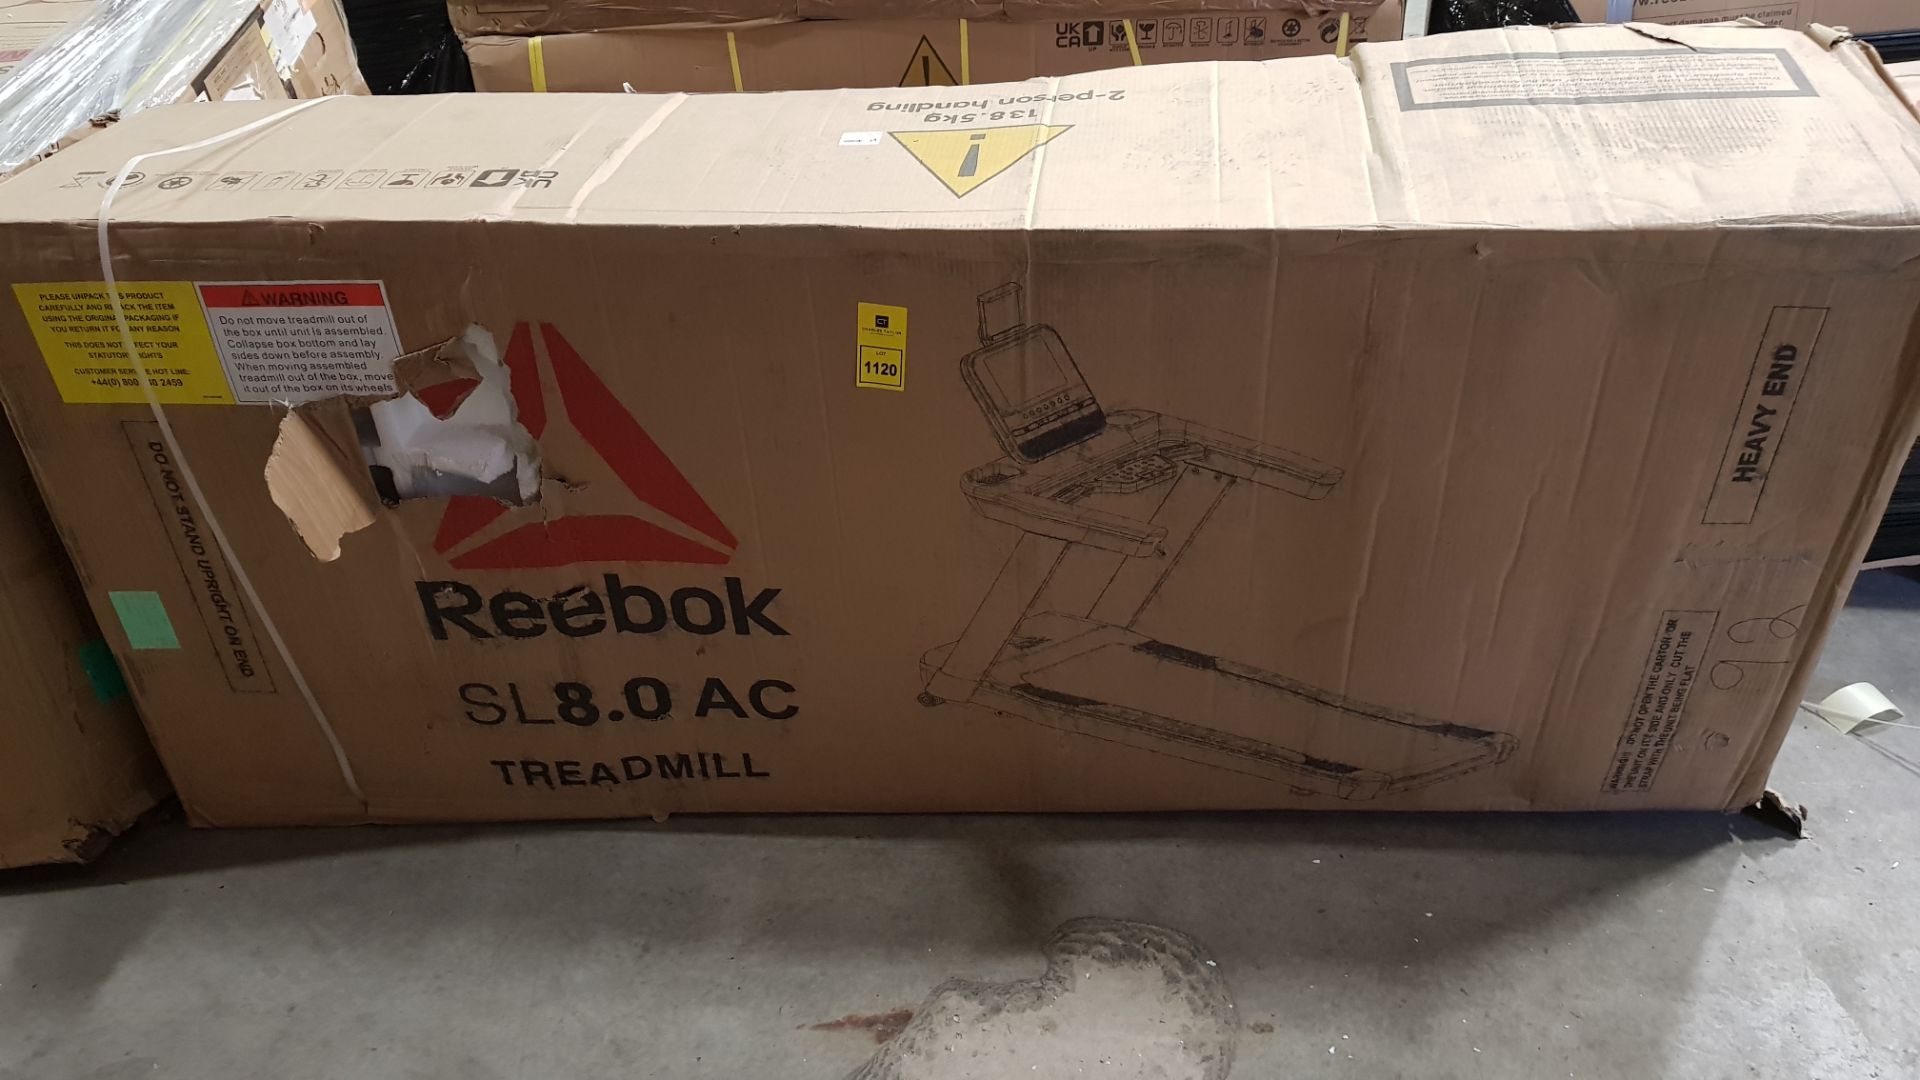 1 X BOXED REEBOK SL8.0 AC TREADMILL IN SILVER - IN 1 BOX ( PLEASE NOTE CUSTOMER RETURN AND DAMAGE ON - Image 2 of 2